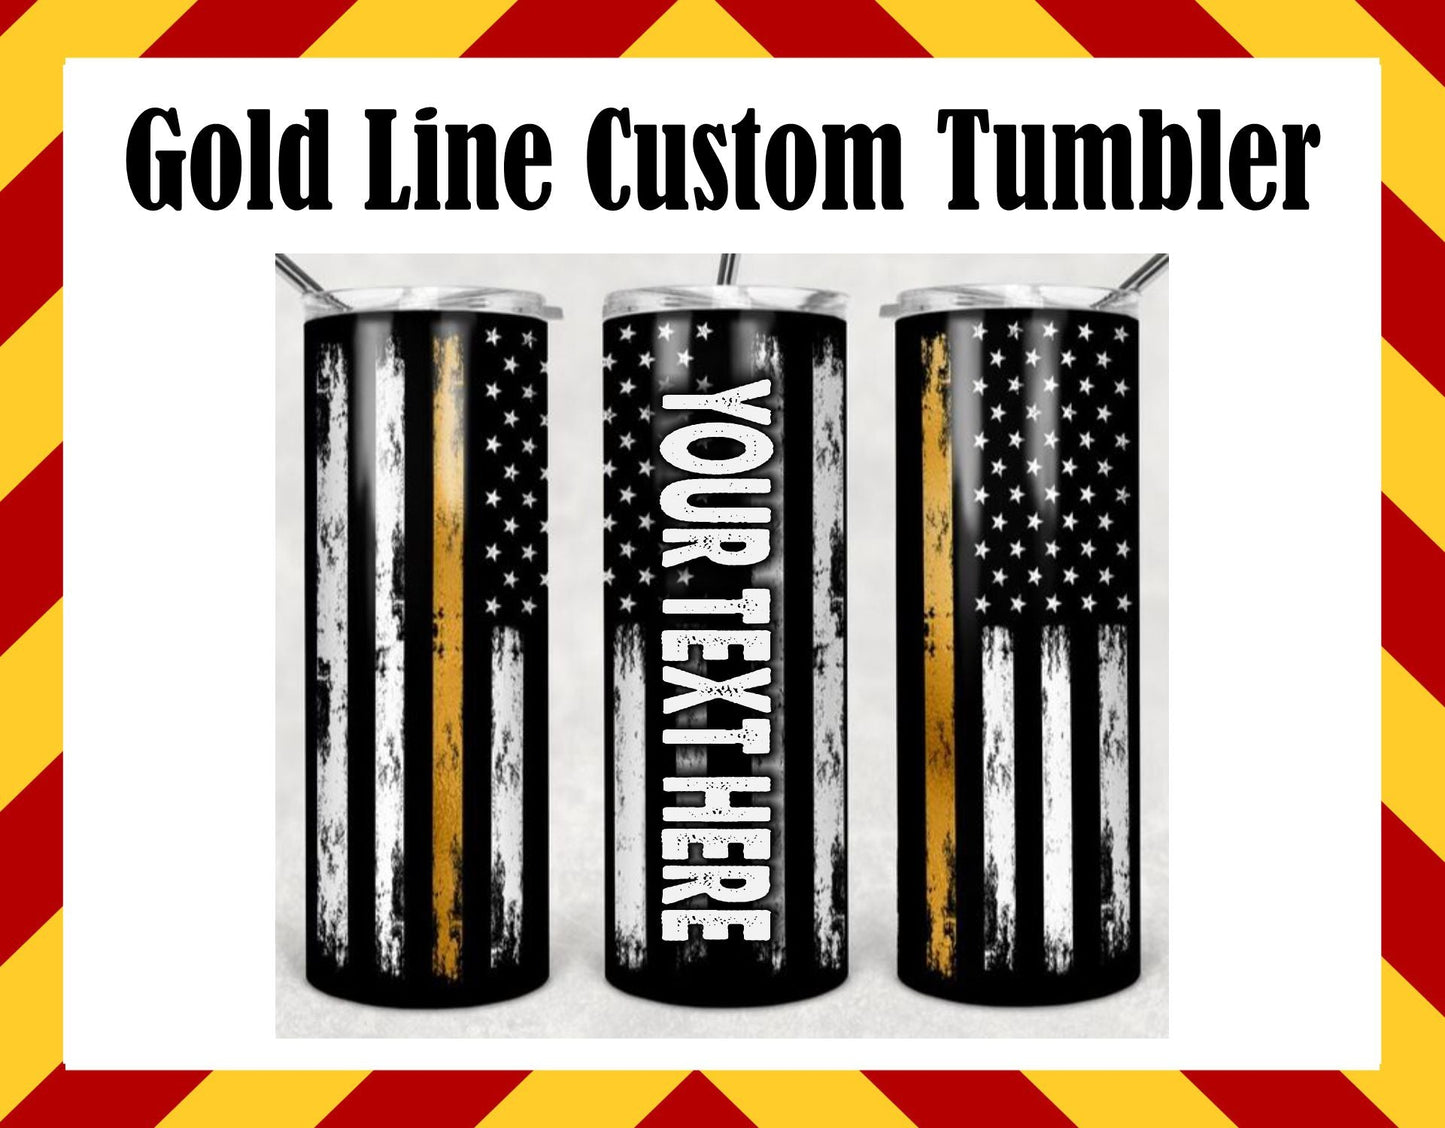 Stainless Steel Cup - Thin Gold Line Design Hot/Cold Cup